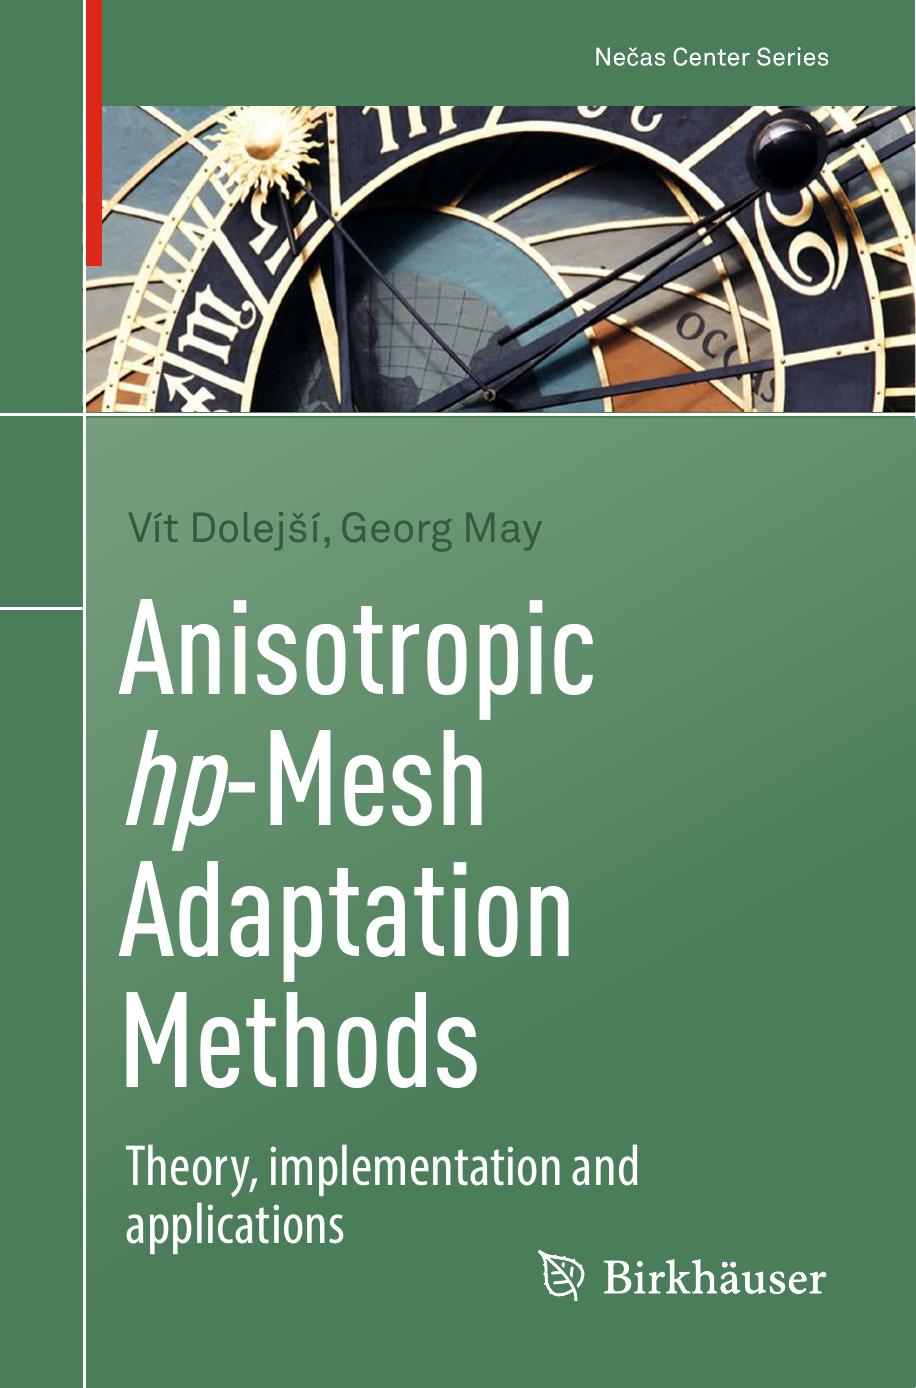 Anisotropic hp-Mesh Adaptation Methods: Theory, implementation and applications (NeÄas Center Series) by Vít Dolejší Georg May